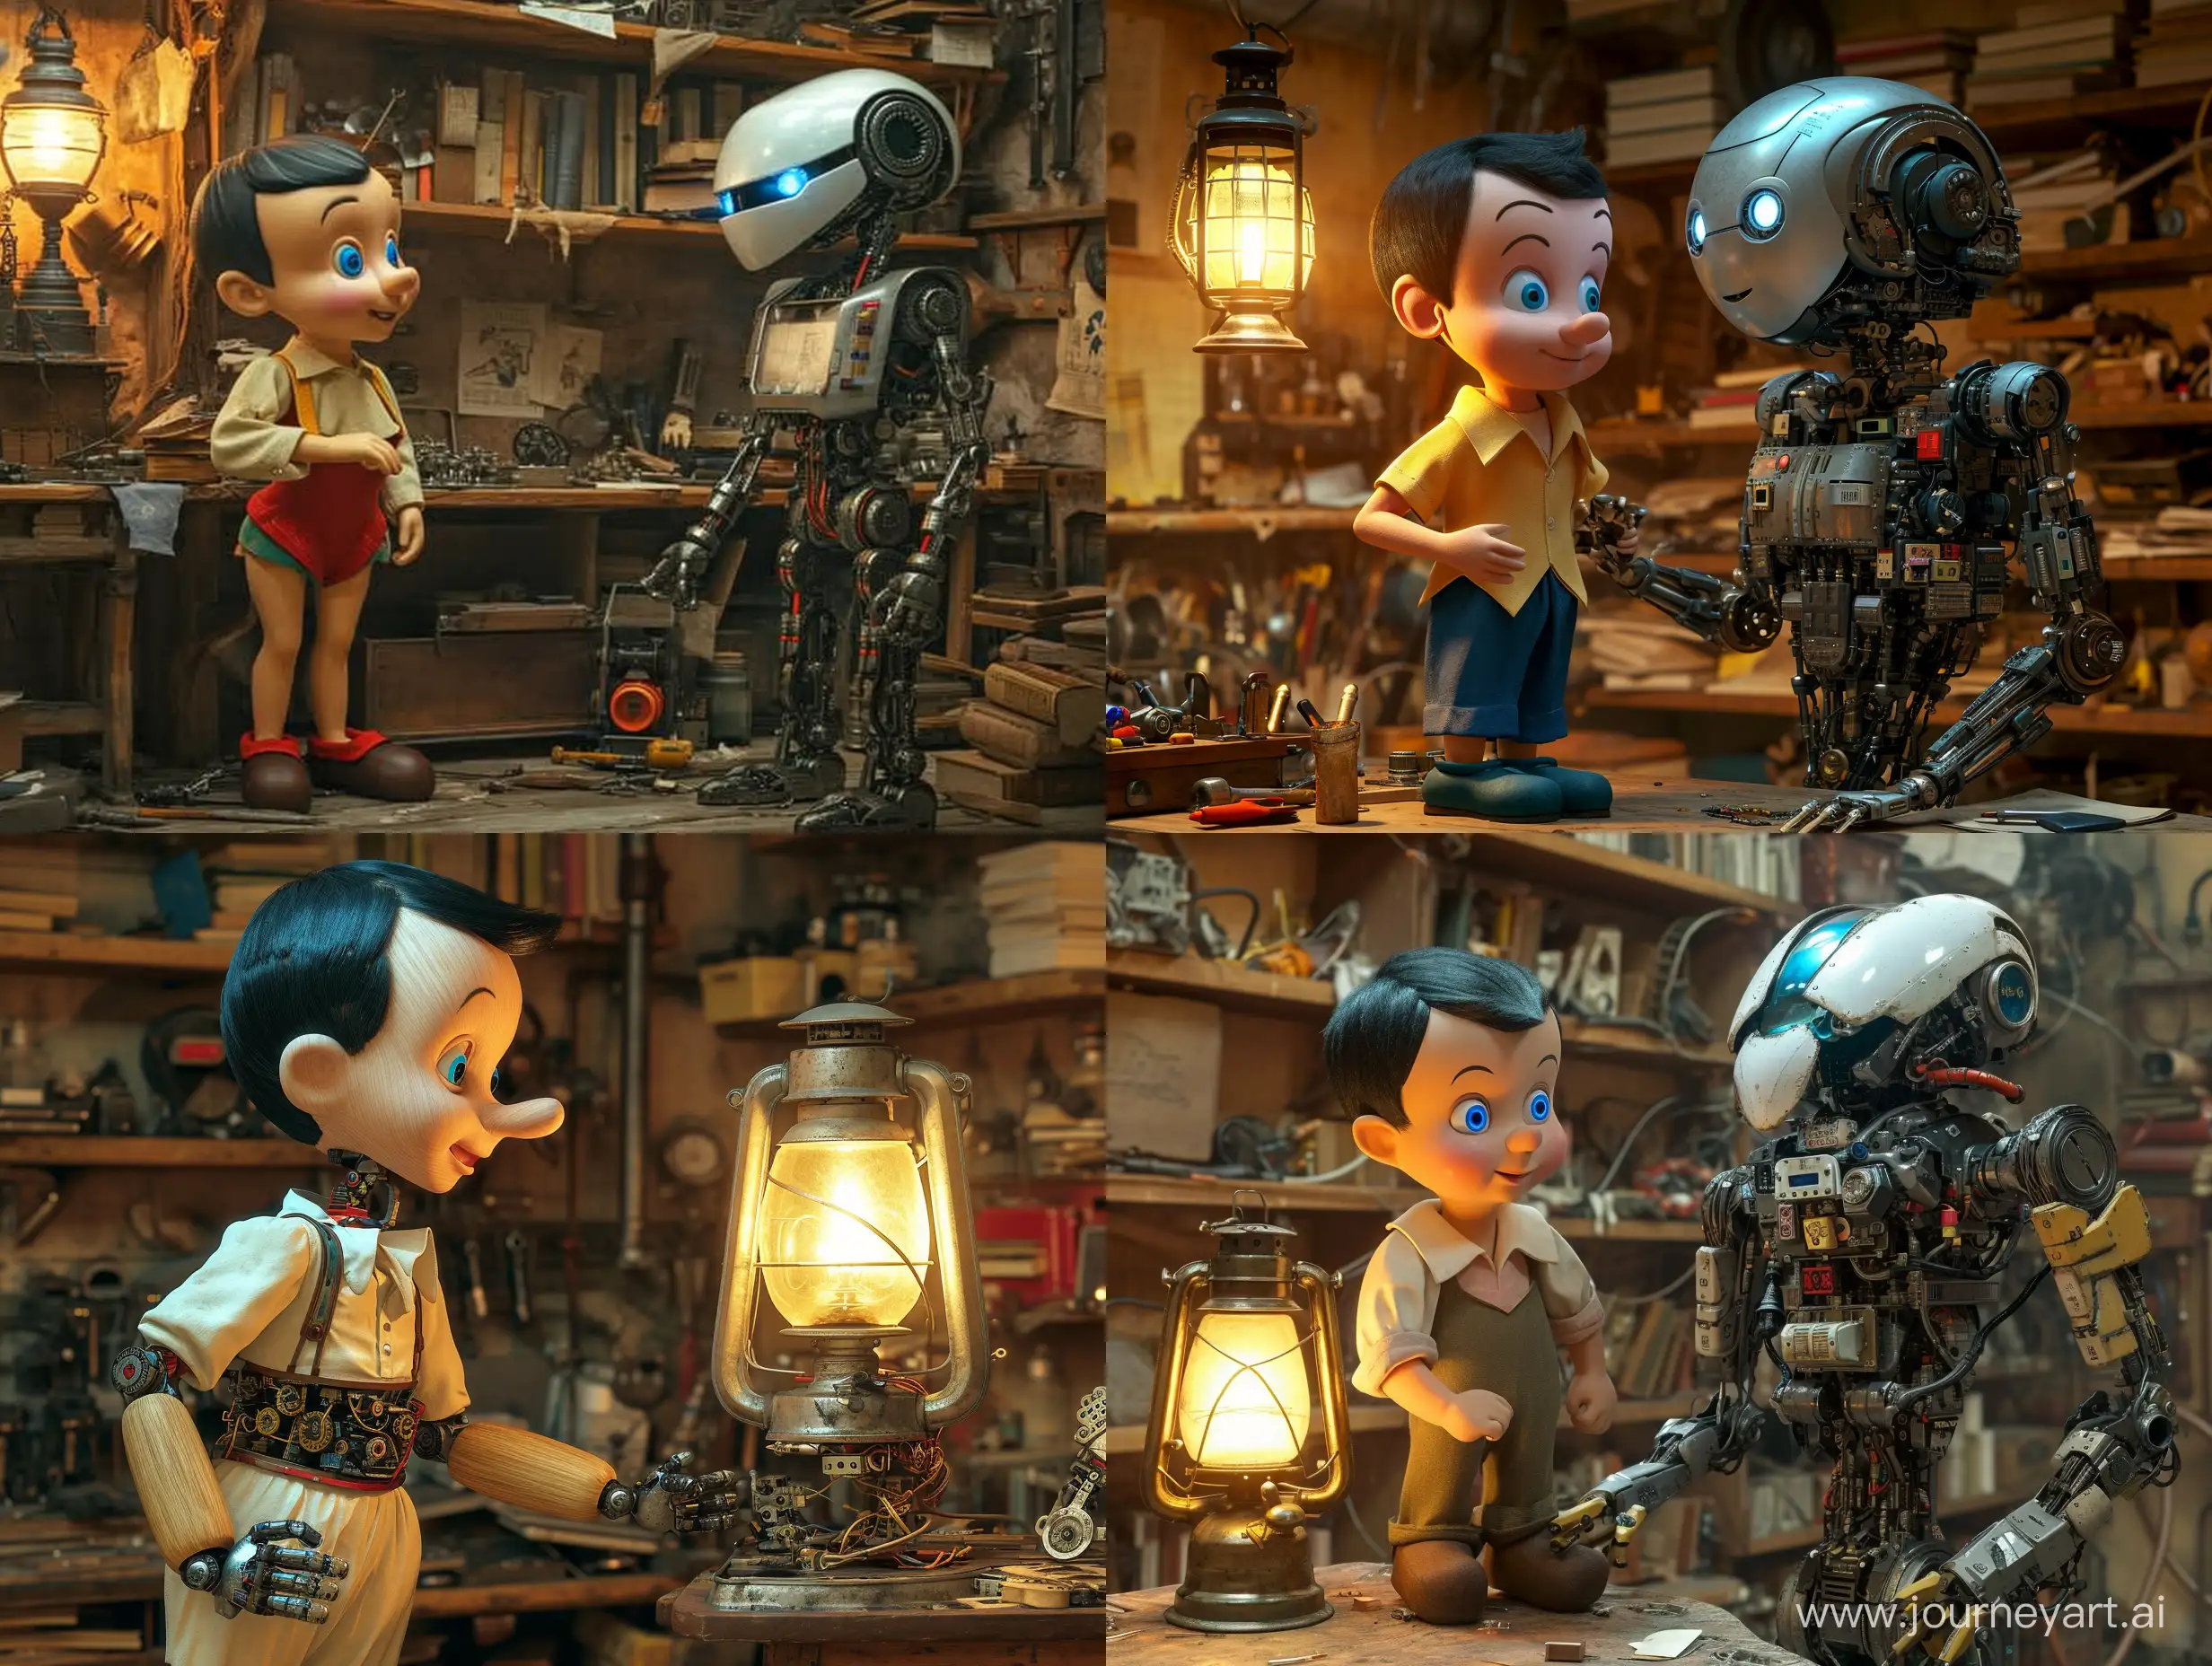 Enchanting-Collaboration-Pinocchio-and-AI-Robot-in-Steampunk-Workshop